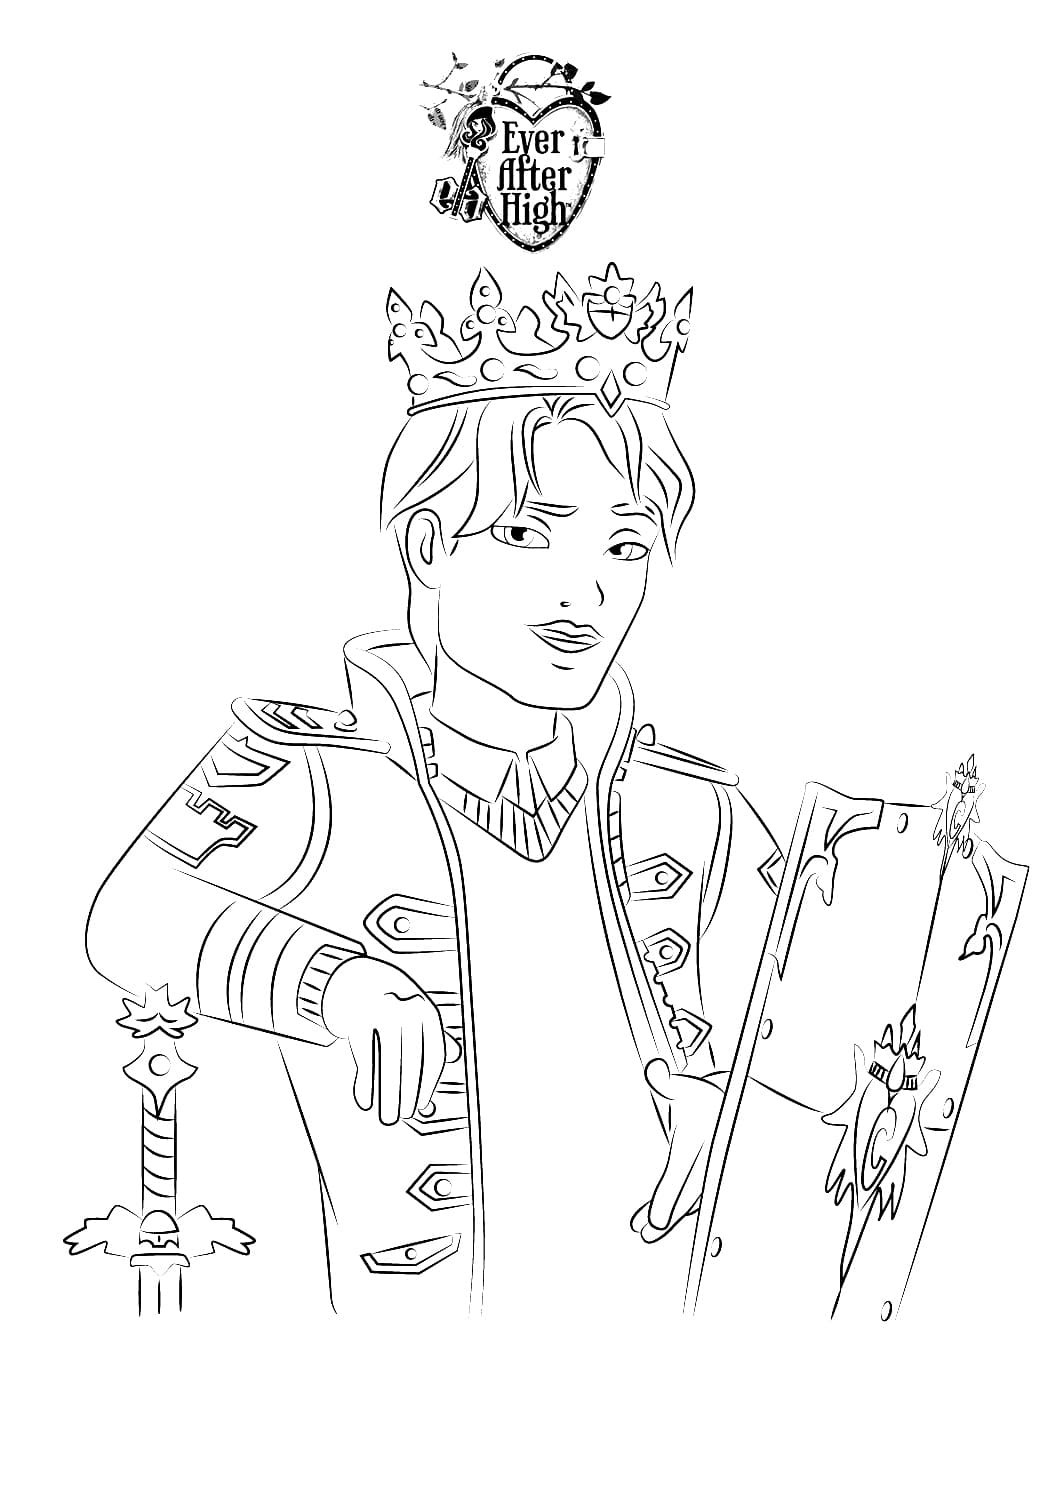 Ever After High coloring pages - Printable coloring pages